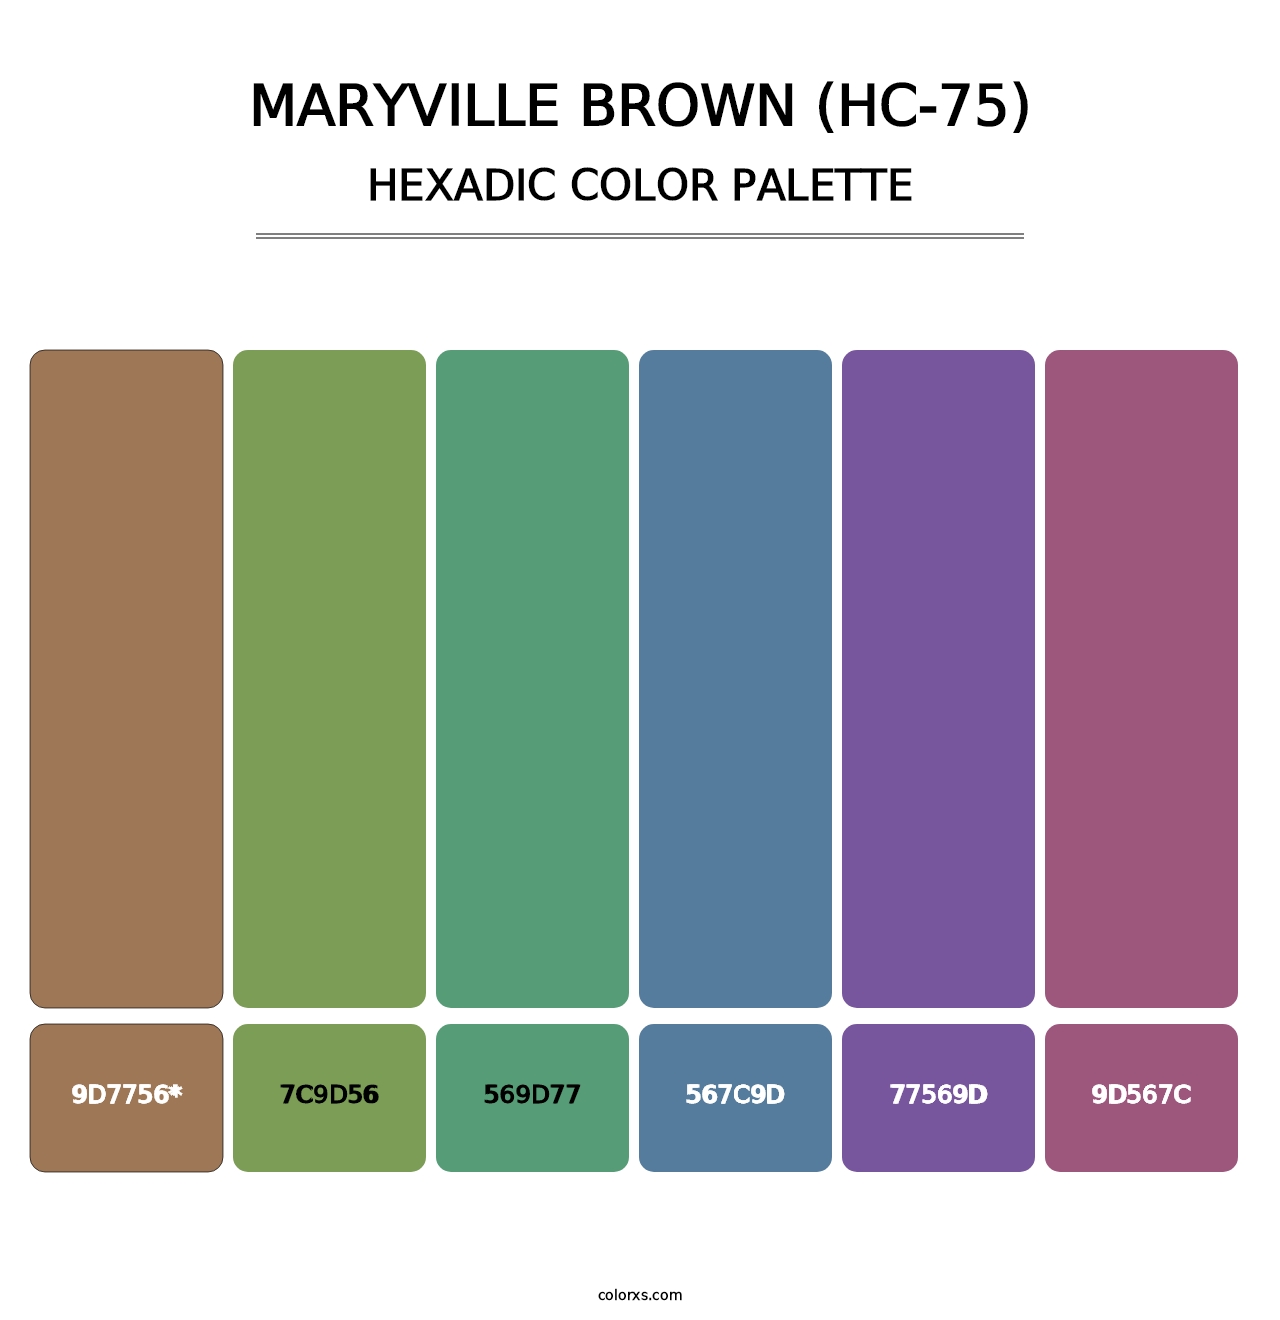 Maryville Brown (HC-75) - Hexadic Color Palette